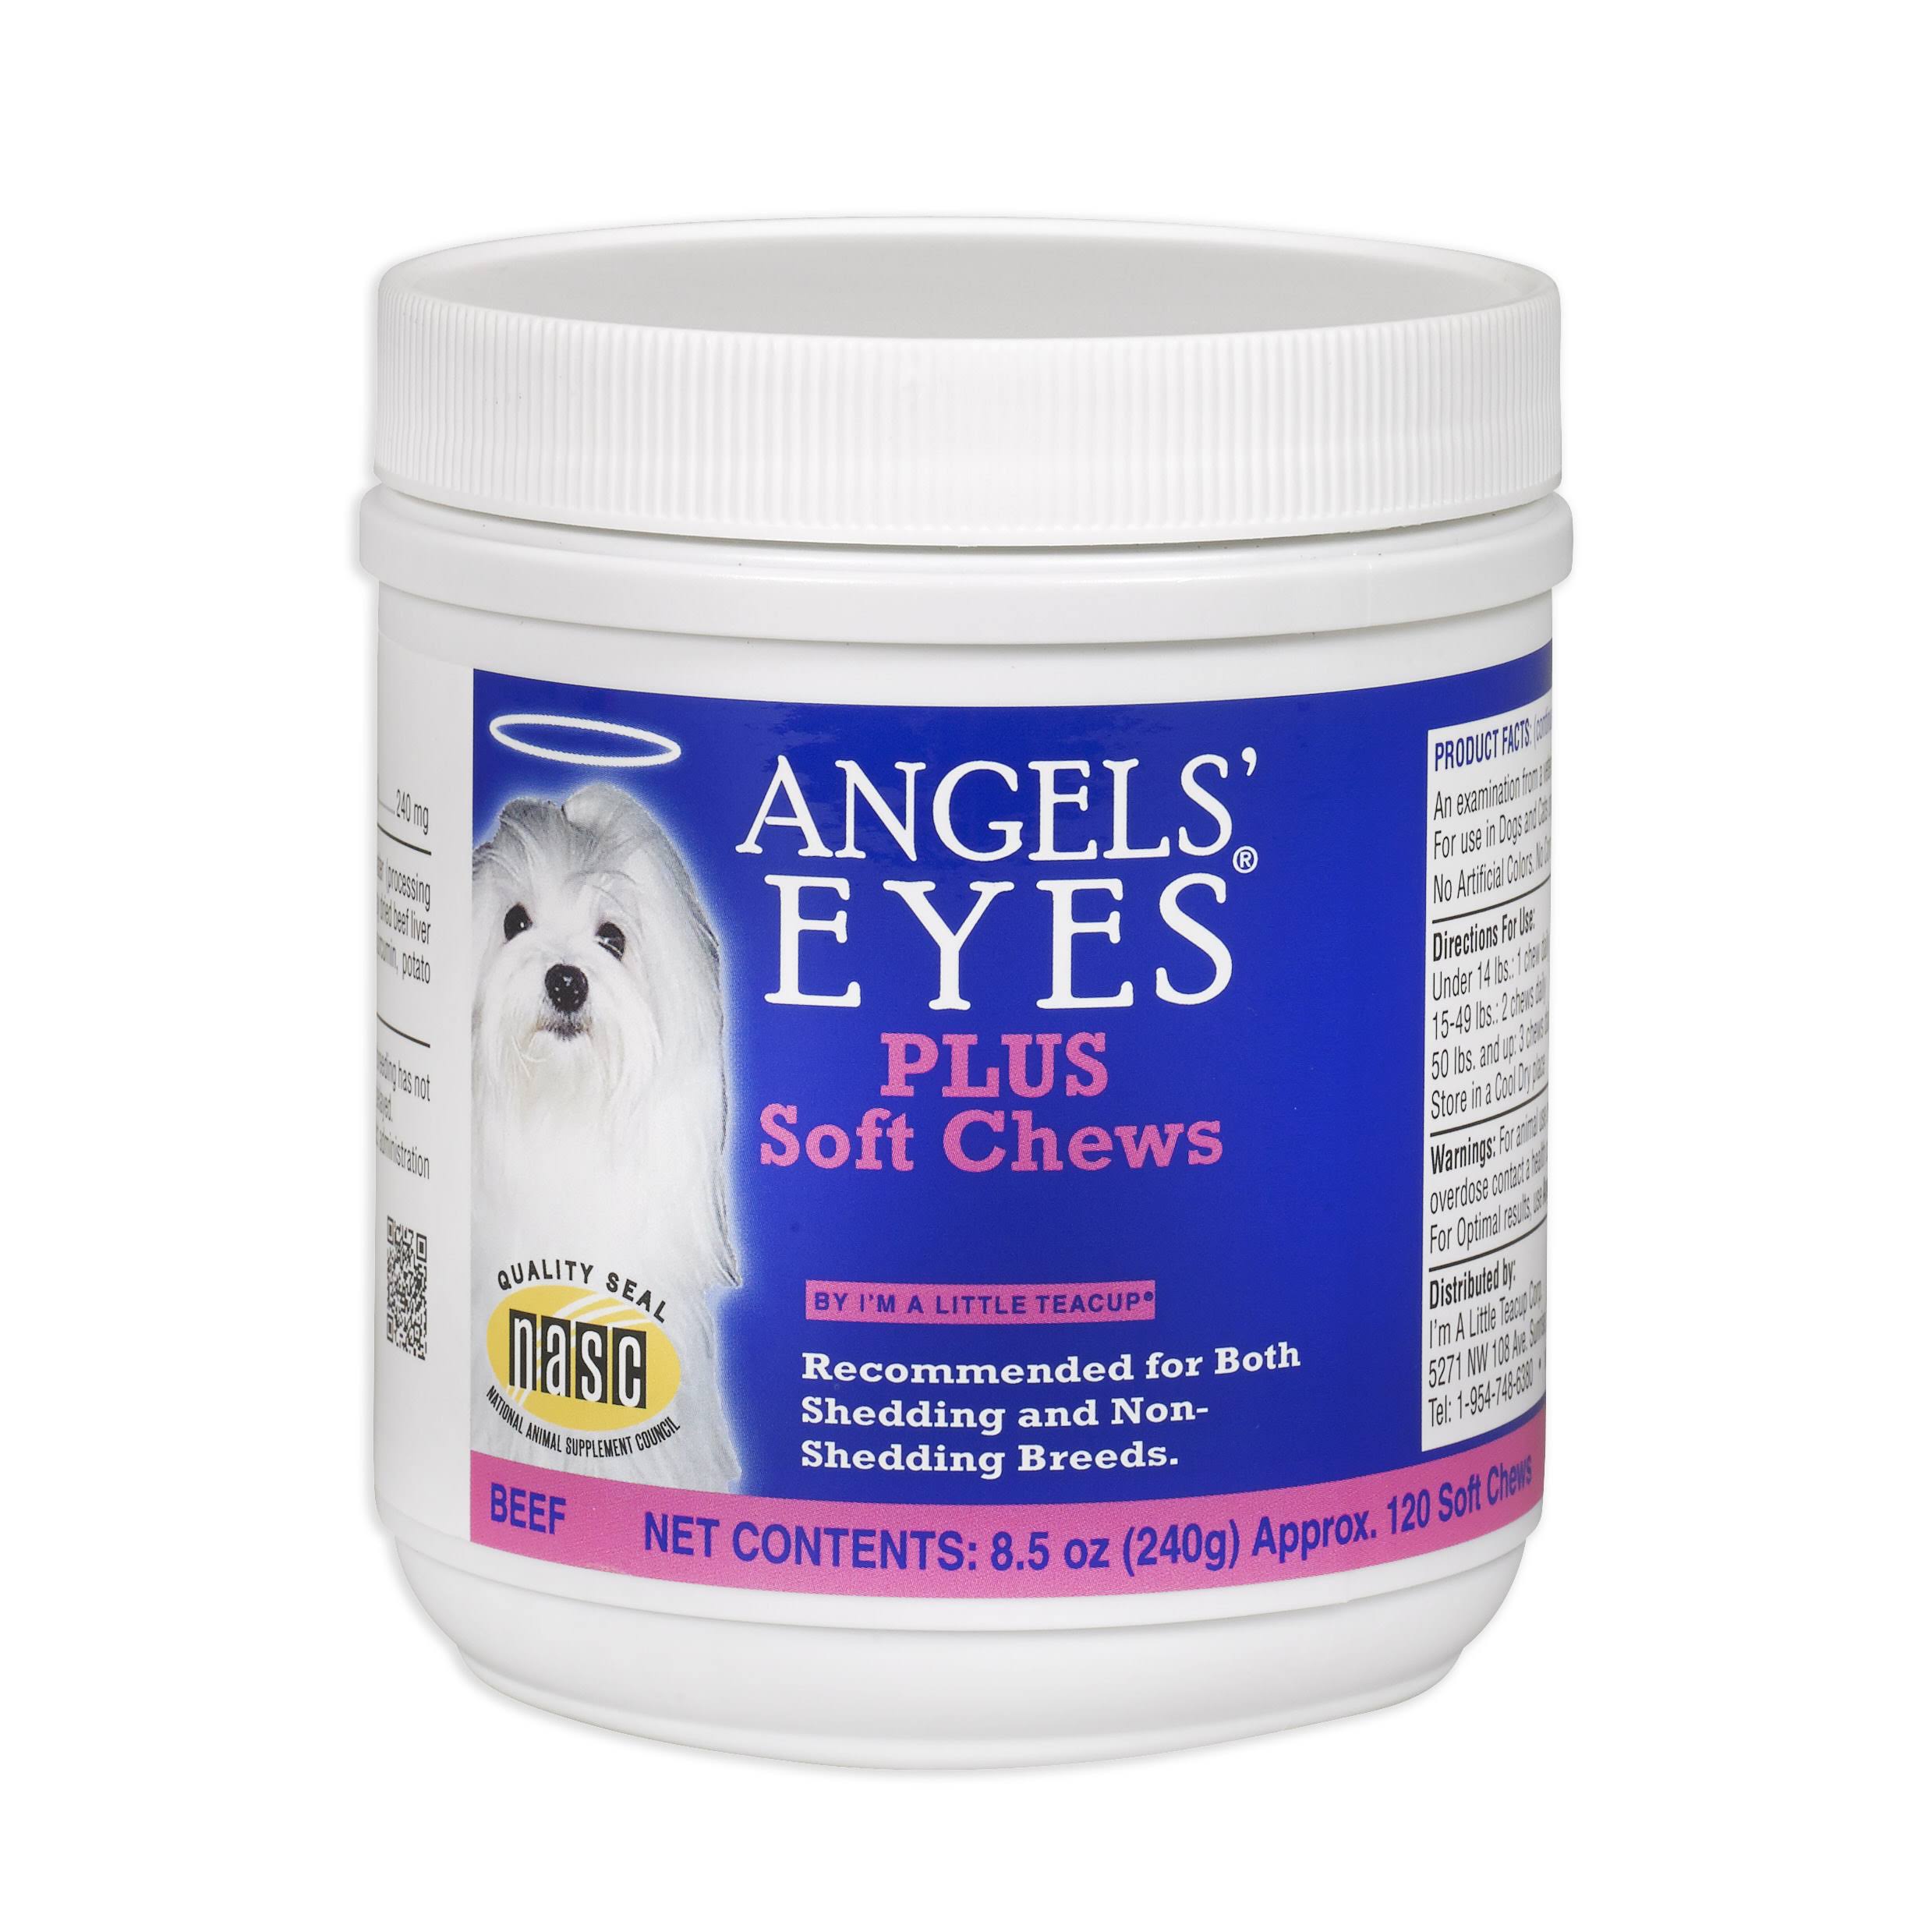 Angels' Eyes Plus Soft Chews for Dogs - 120ct, Beef